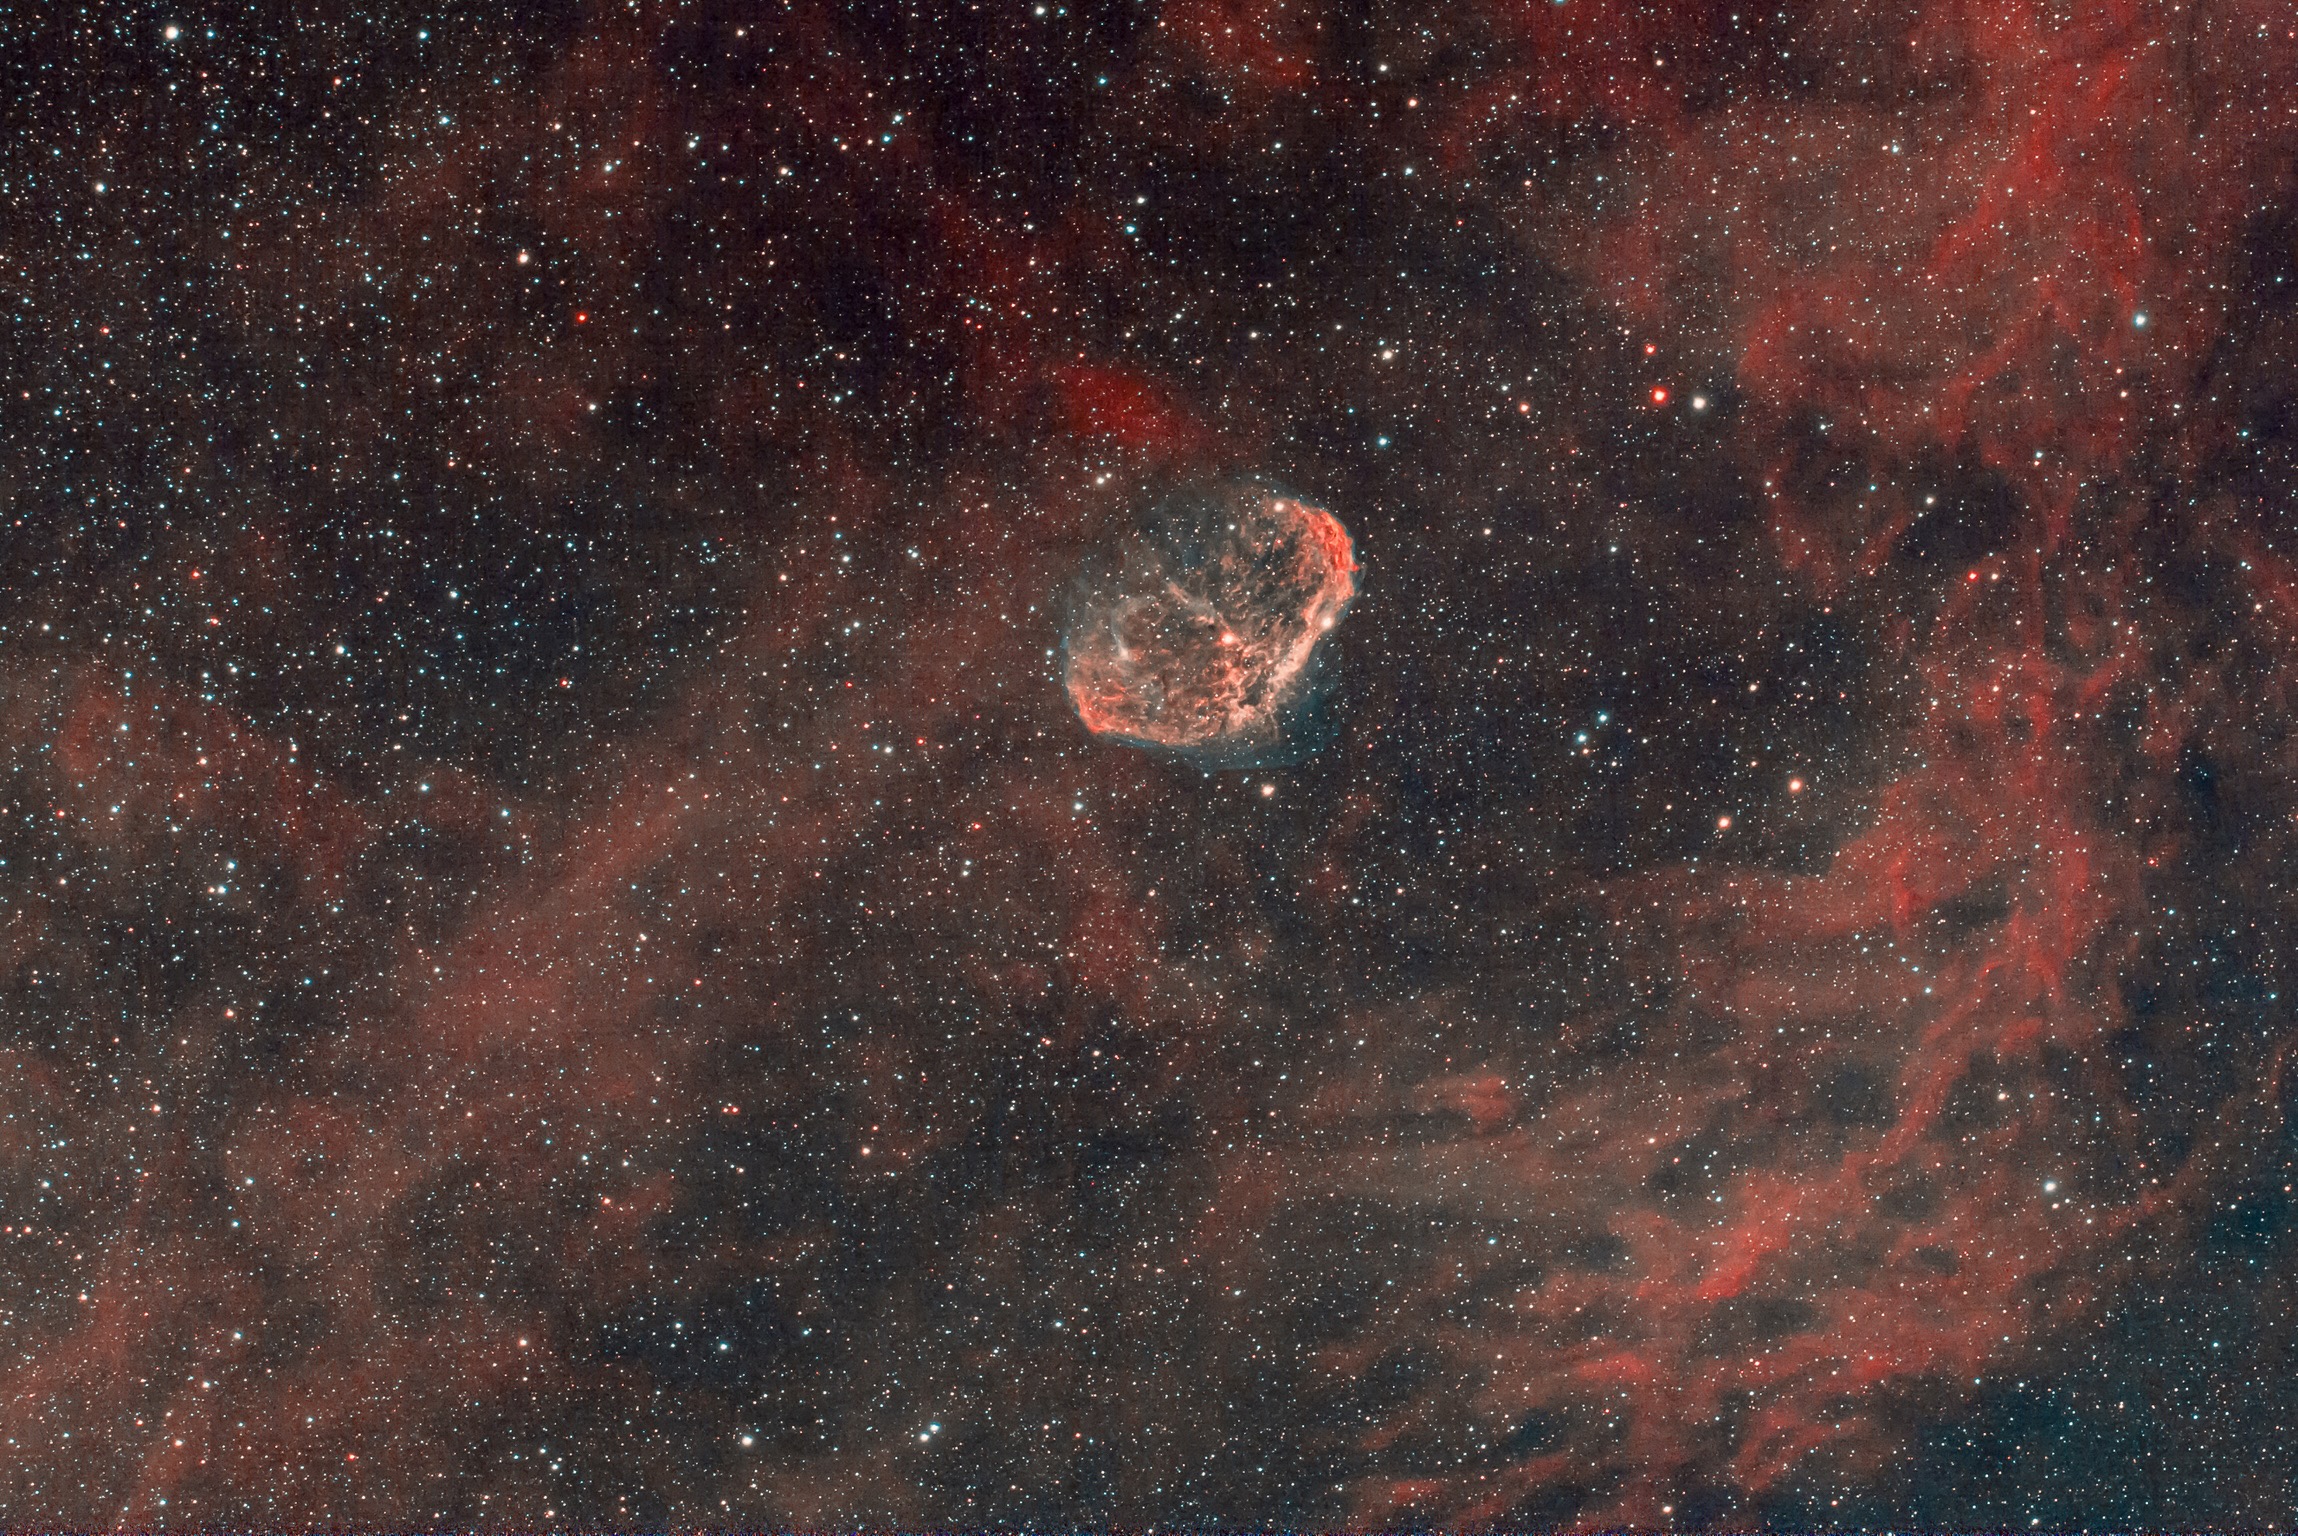 The Crescent Nebula is an emission nebula in the constellation Cygnus, about 5000 light-years away. It is cosmic bubble about 25 light-years across, blown by winds from its central, bright, massive star. It combines a composite color image with narrow band data that isolates light from hydrogen and oxygen atoms in the wind-blown nebula.